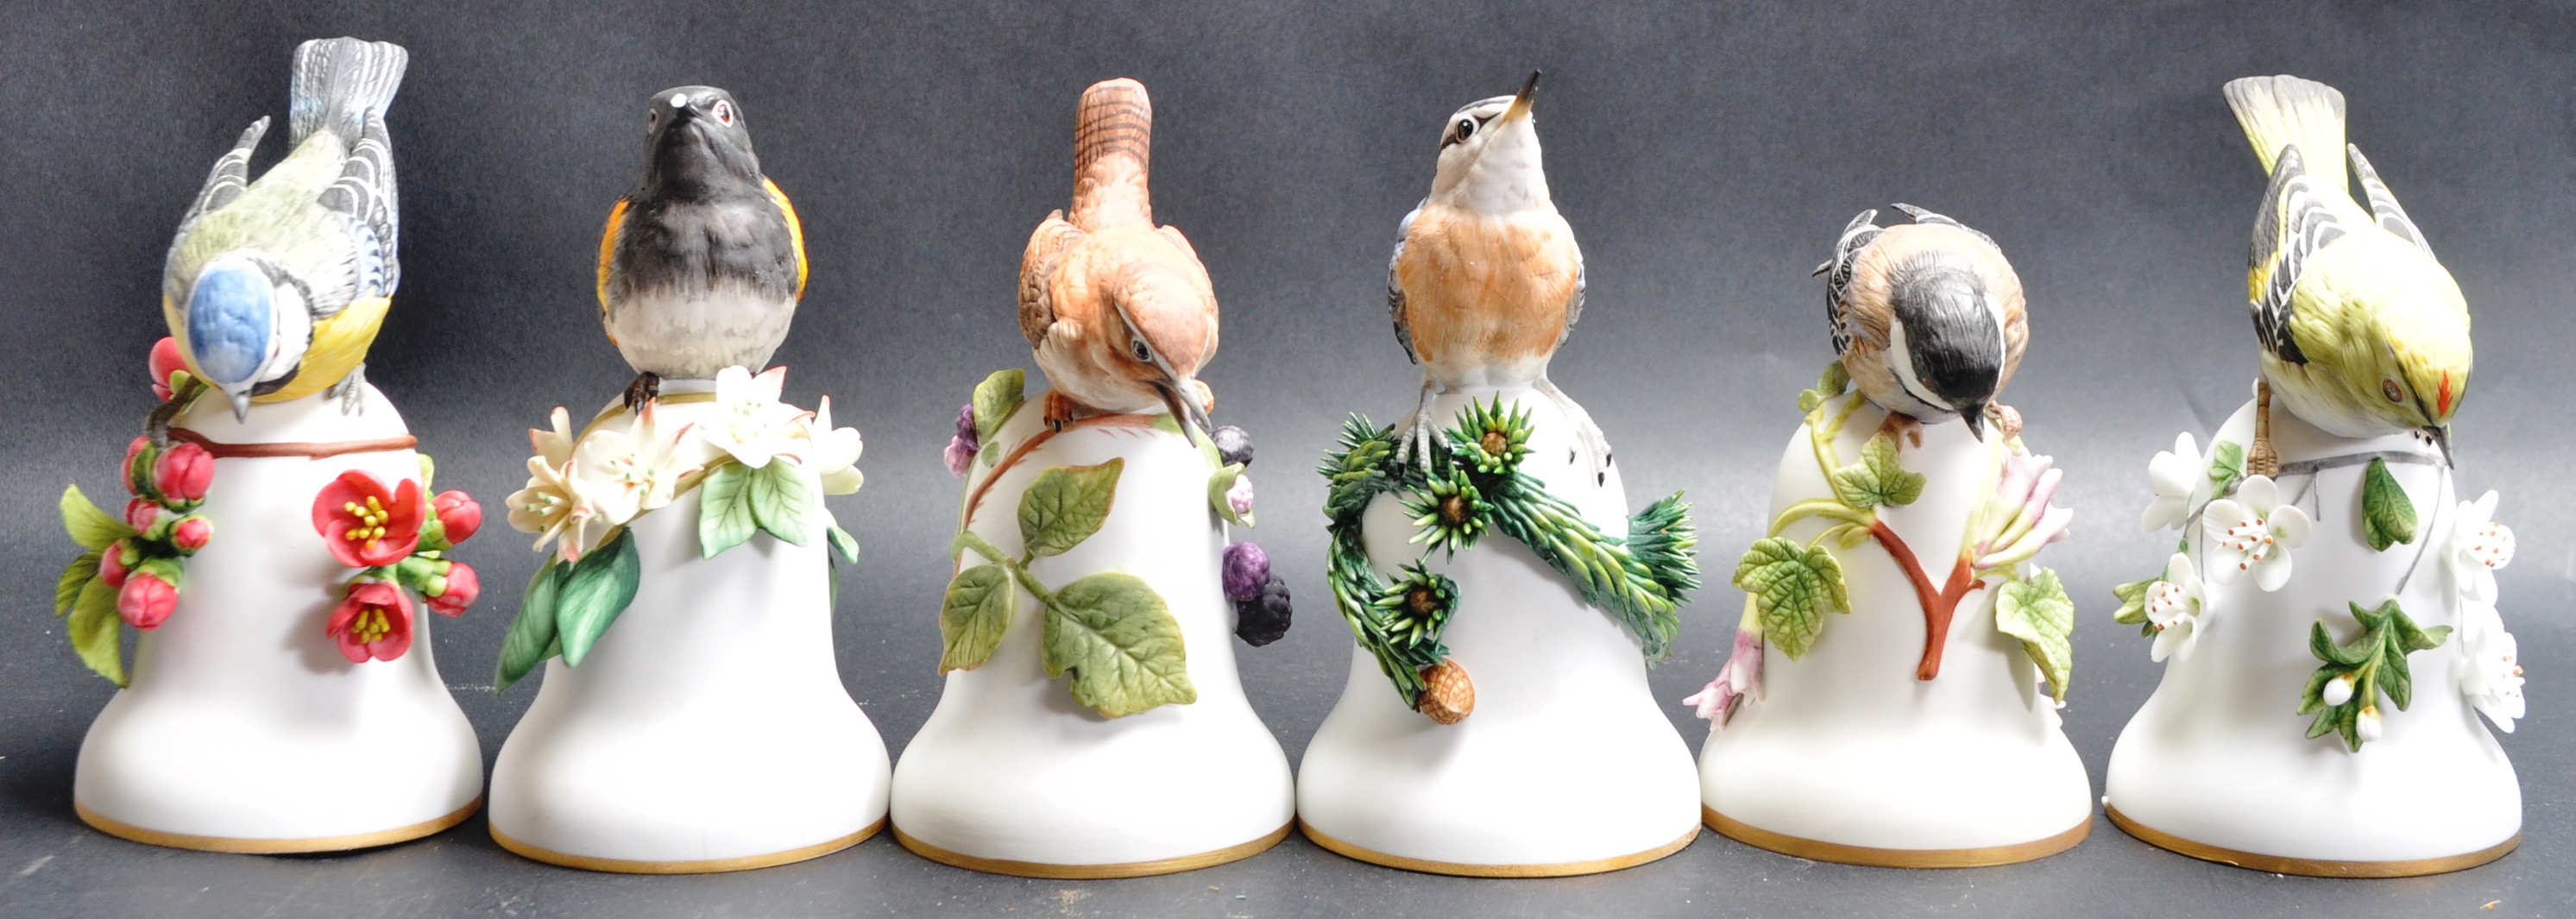 SIX BELL BIRDS BY FRANKLIN MINT BY PETER BARRETT - Image 2 of 8